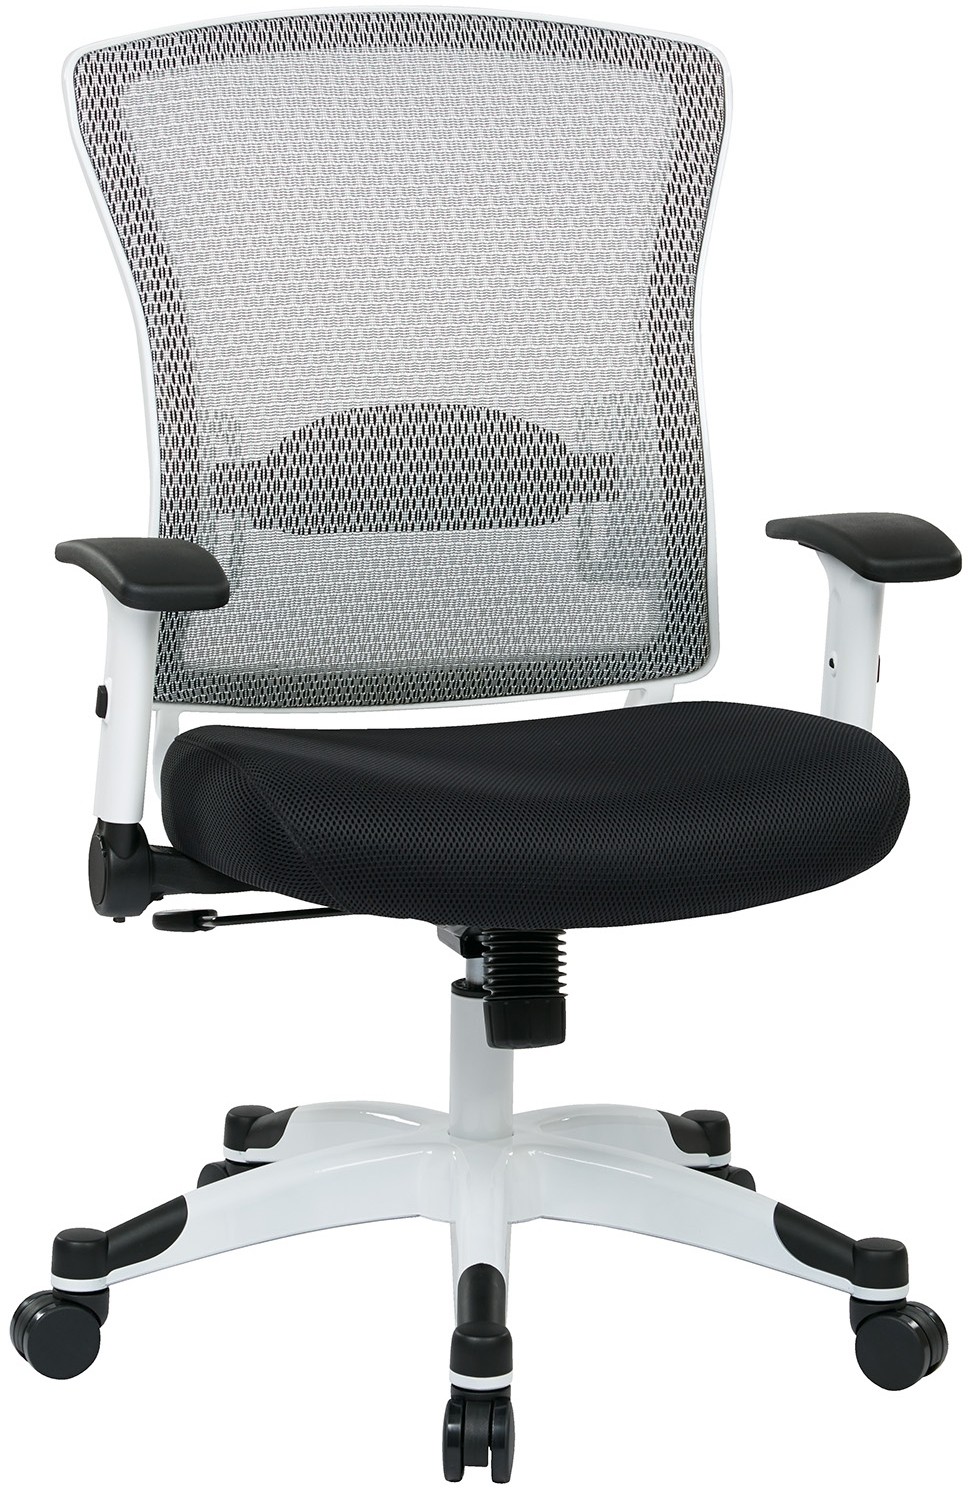 Space Seating Pulsar Series Manager's Chair